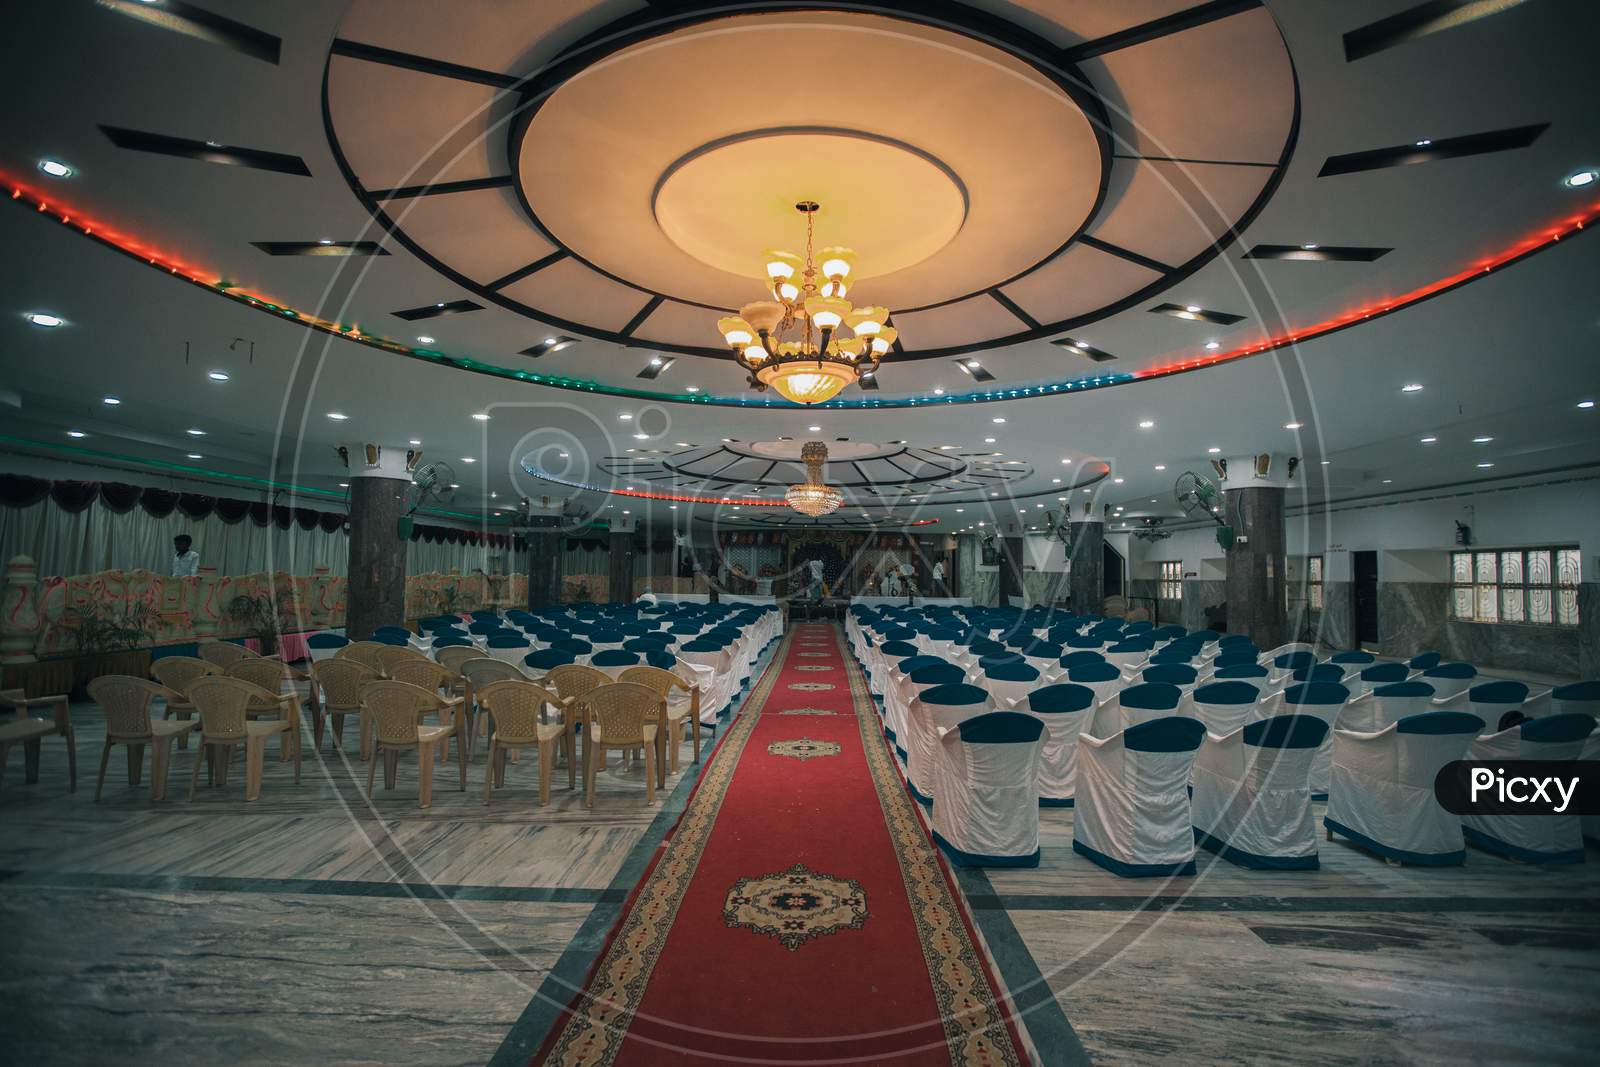 Marriage hall | with wide frame